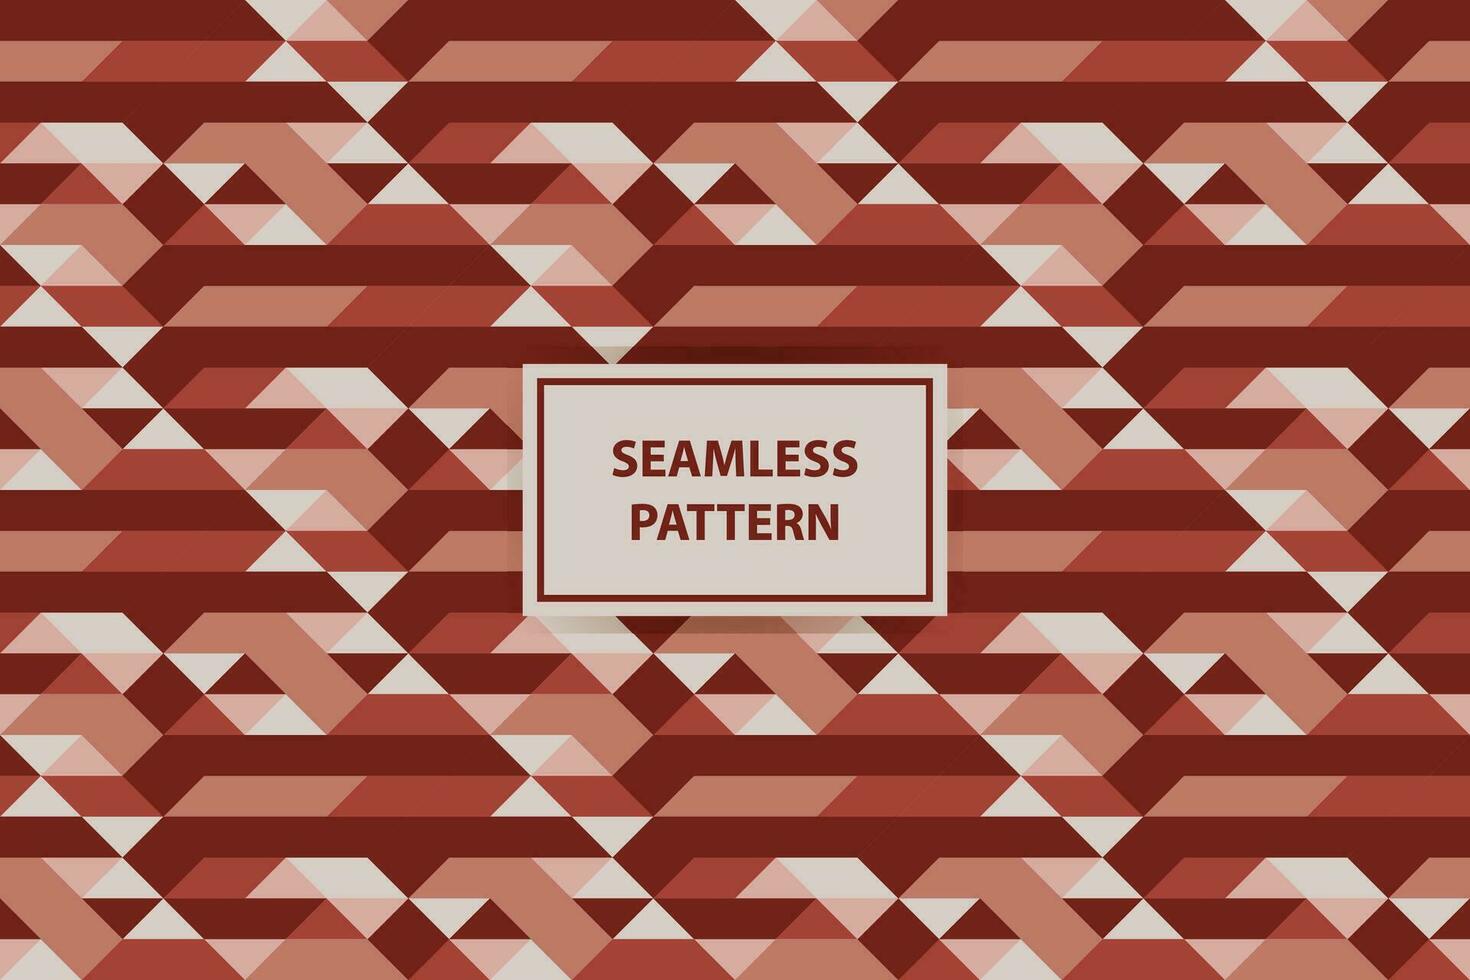 geomteric sameless abstract pattern. modern pattern with fresh color vector